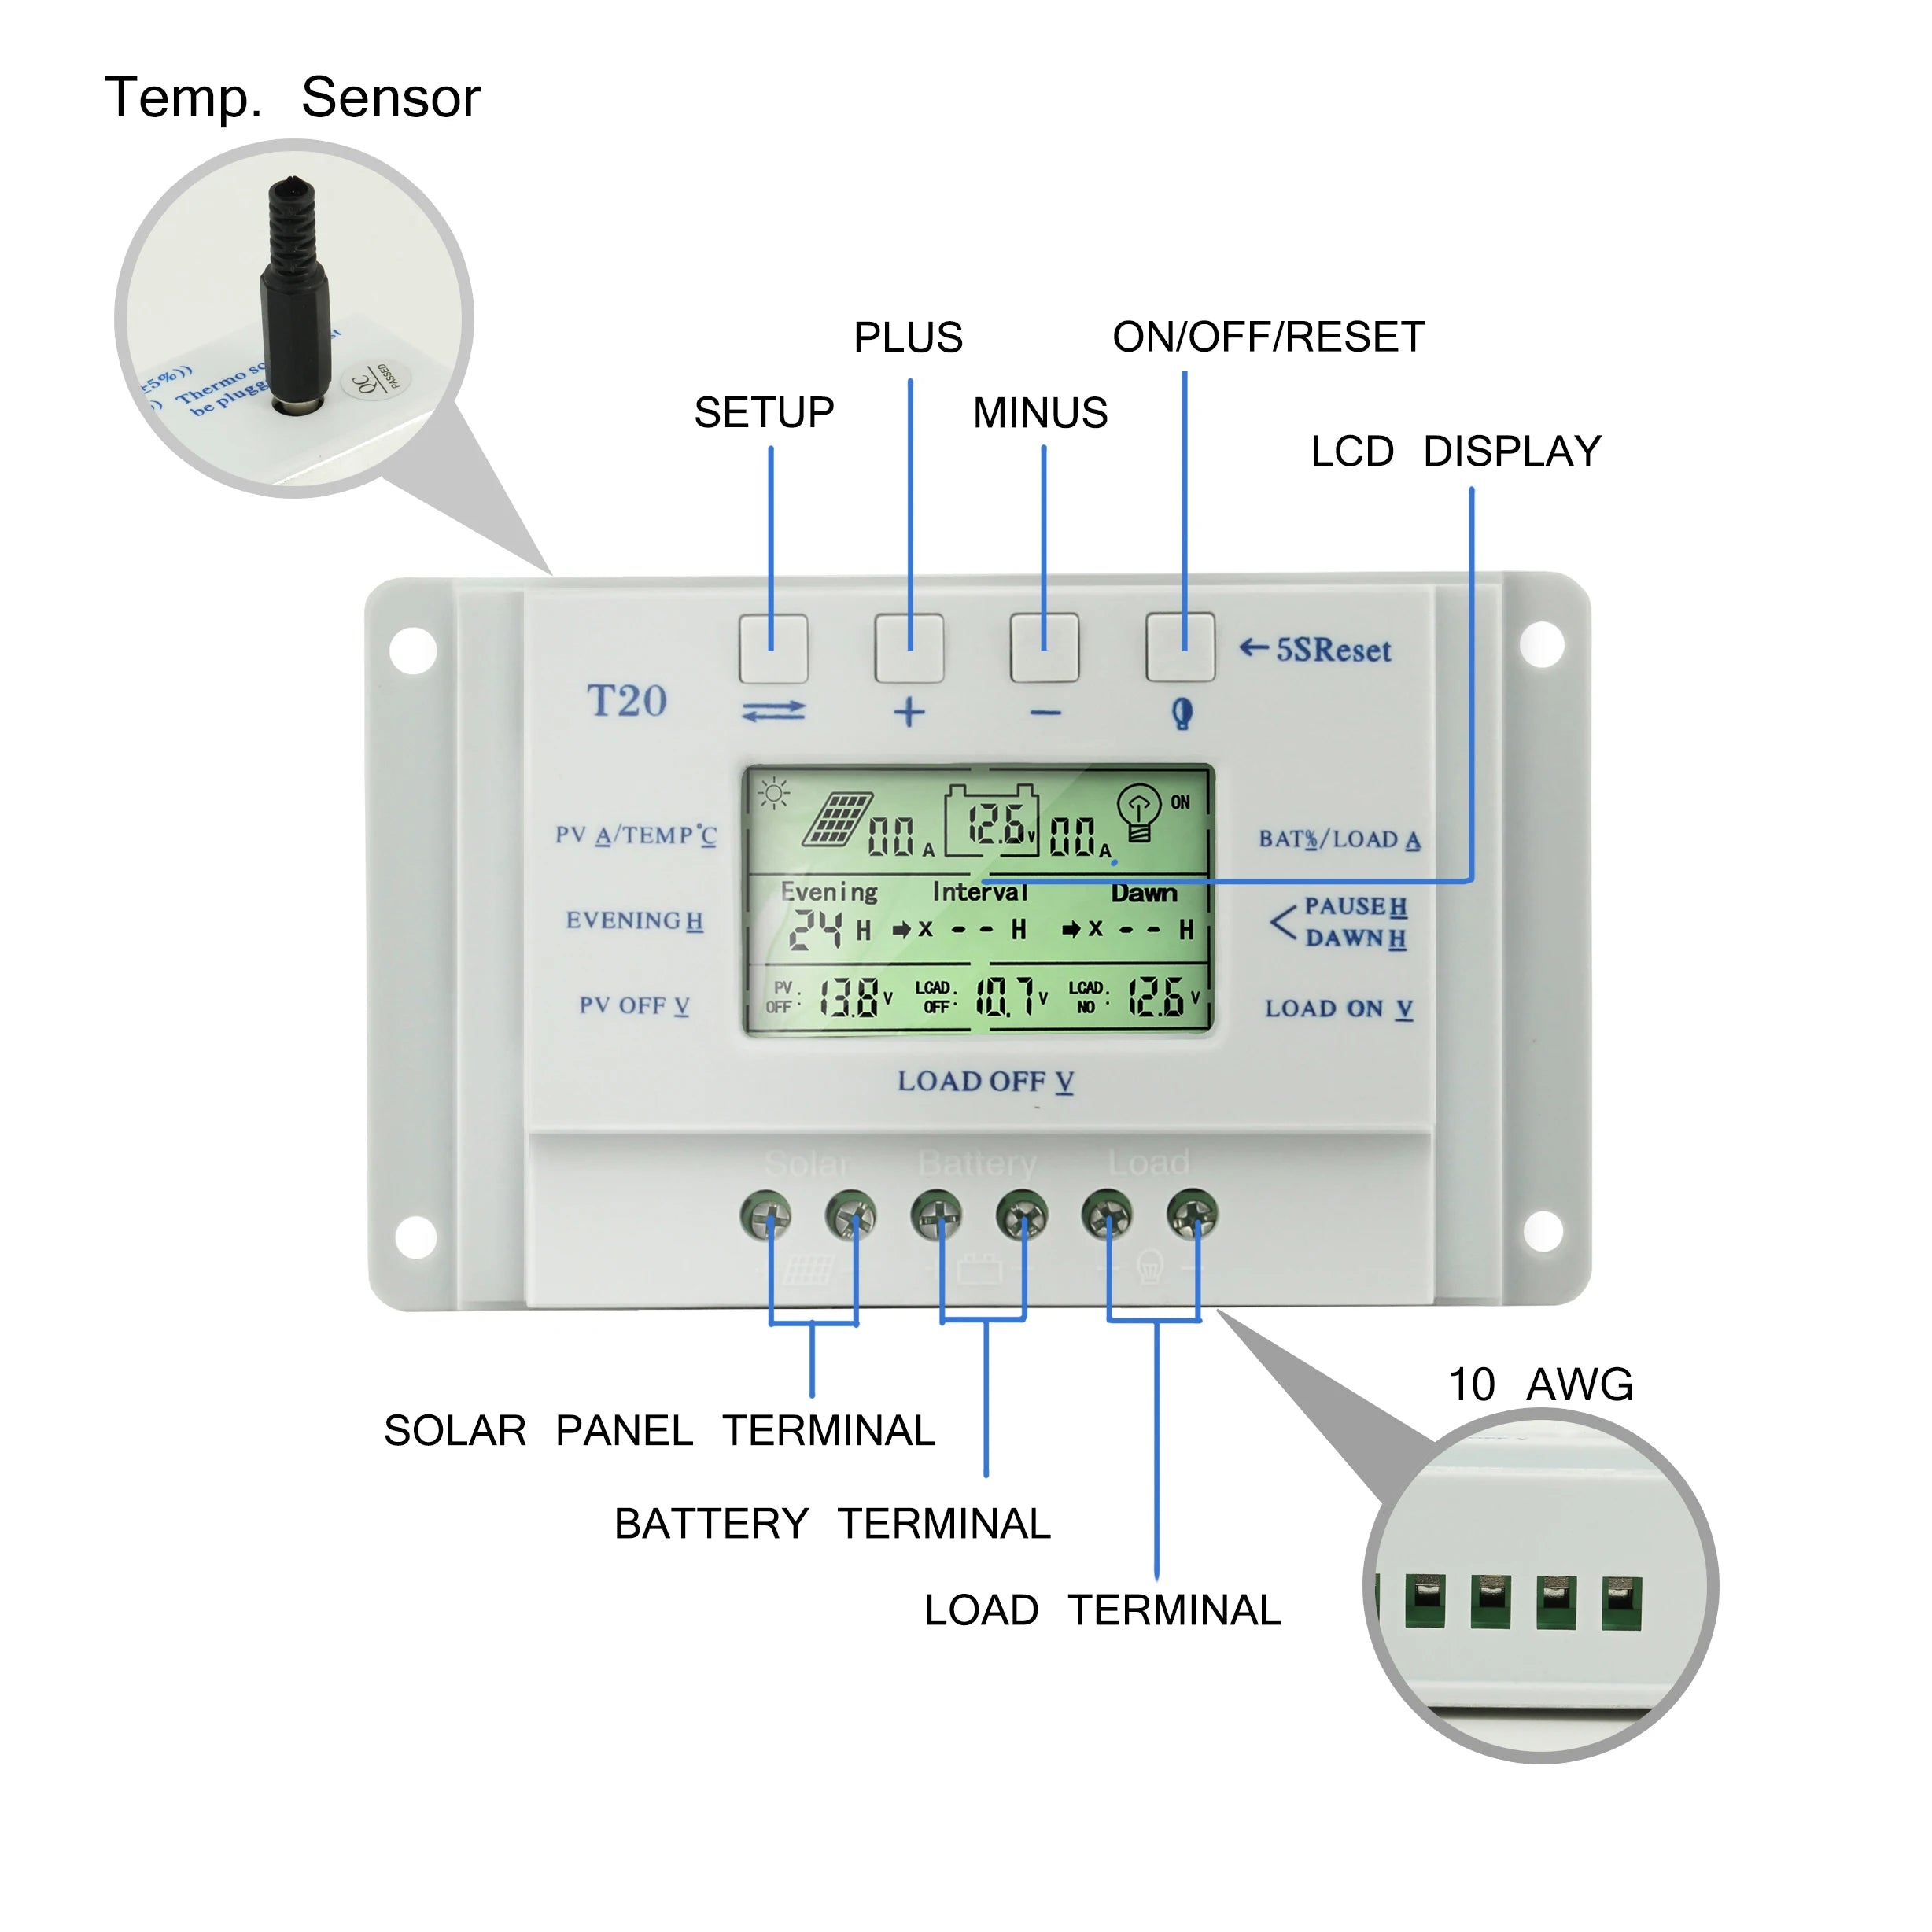 PowMr Solar Charge Controller, HBD10 Promotion: Get $10 off on T Series 10A, 20A, 30A, or 40A until March 26th!